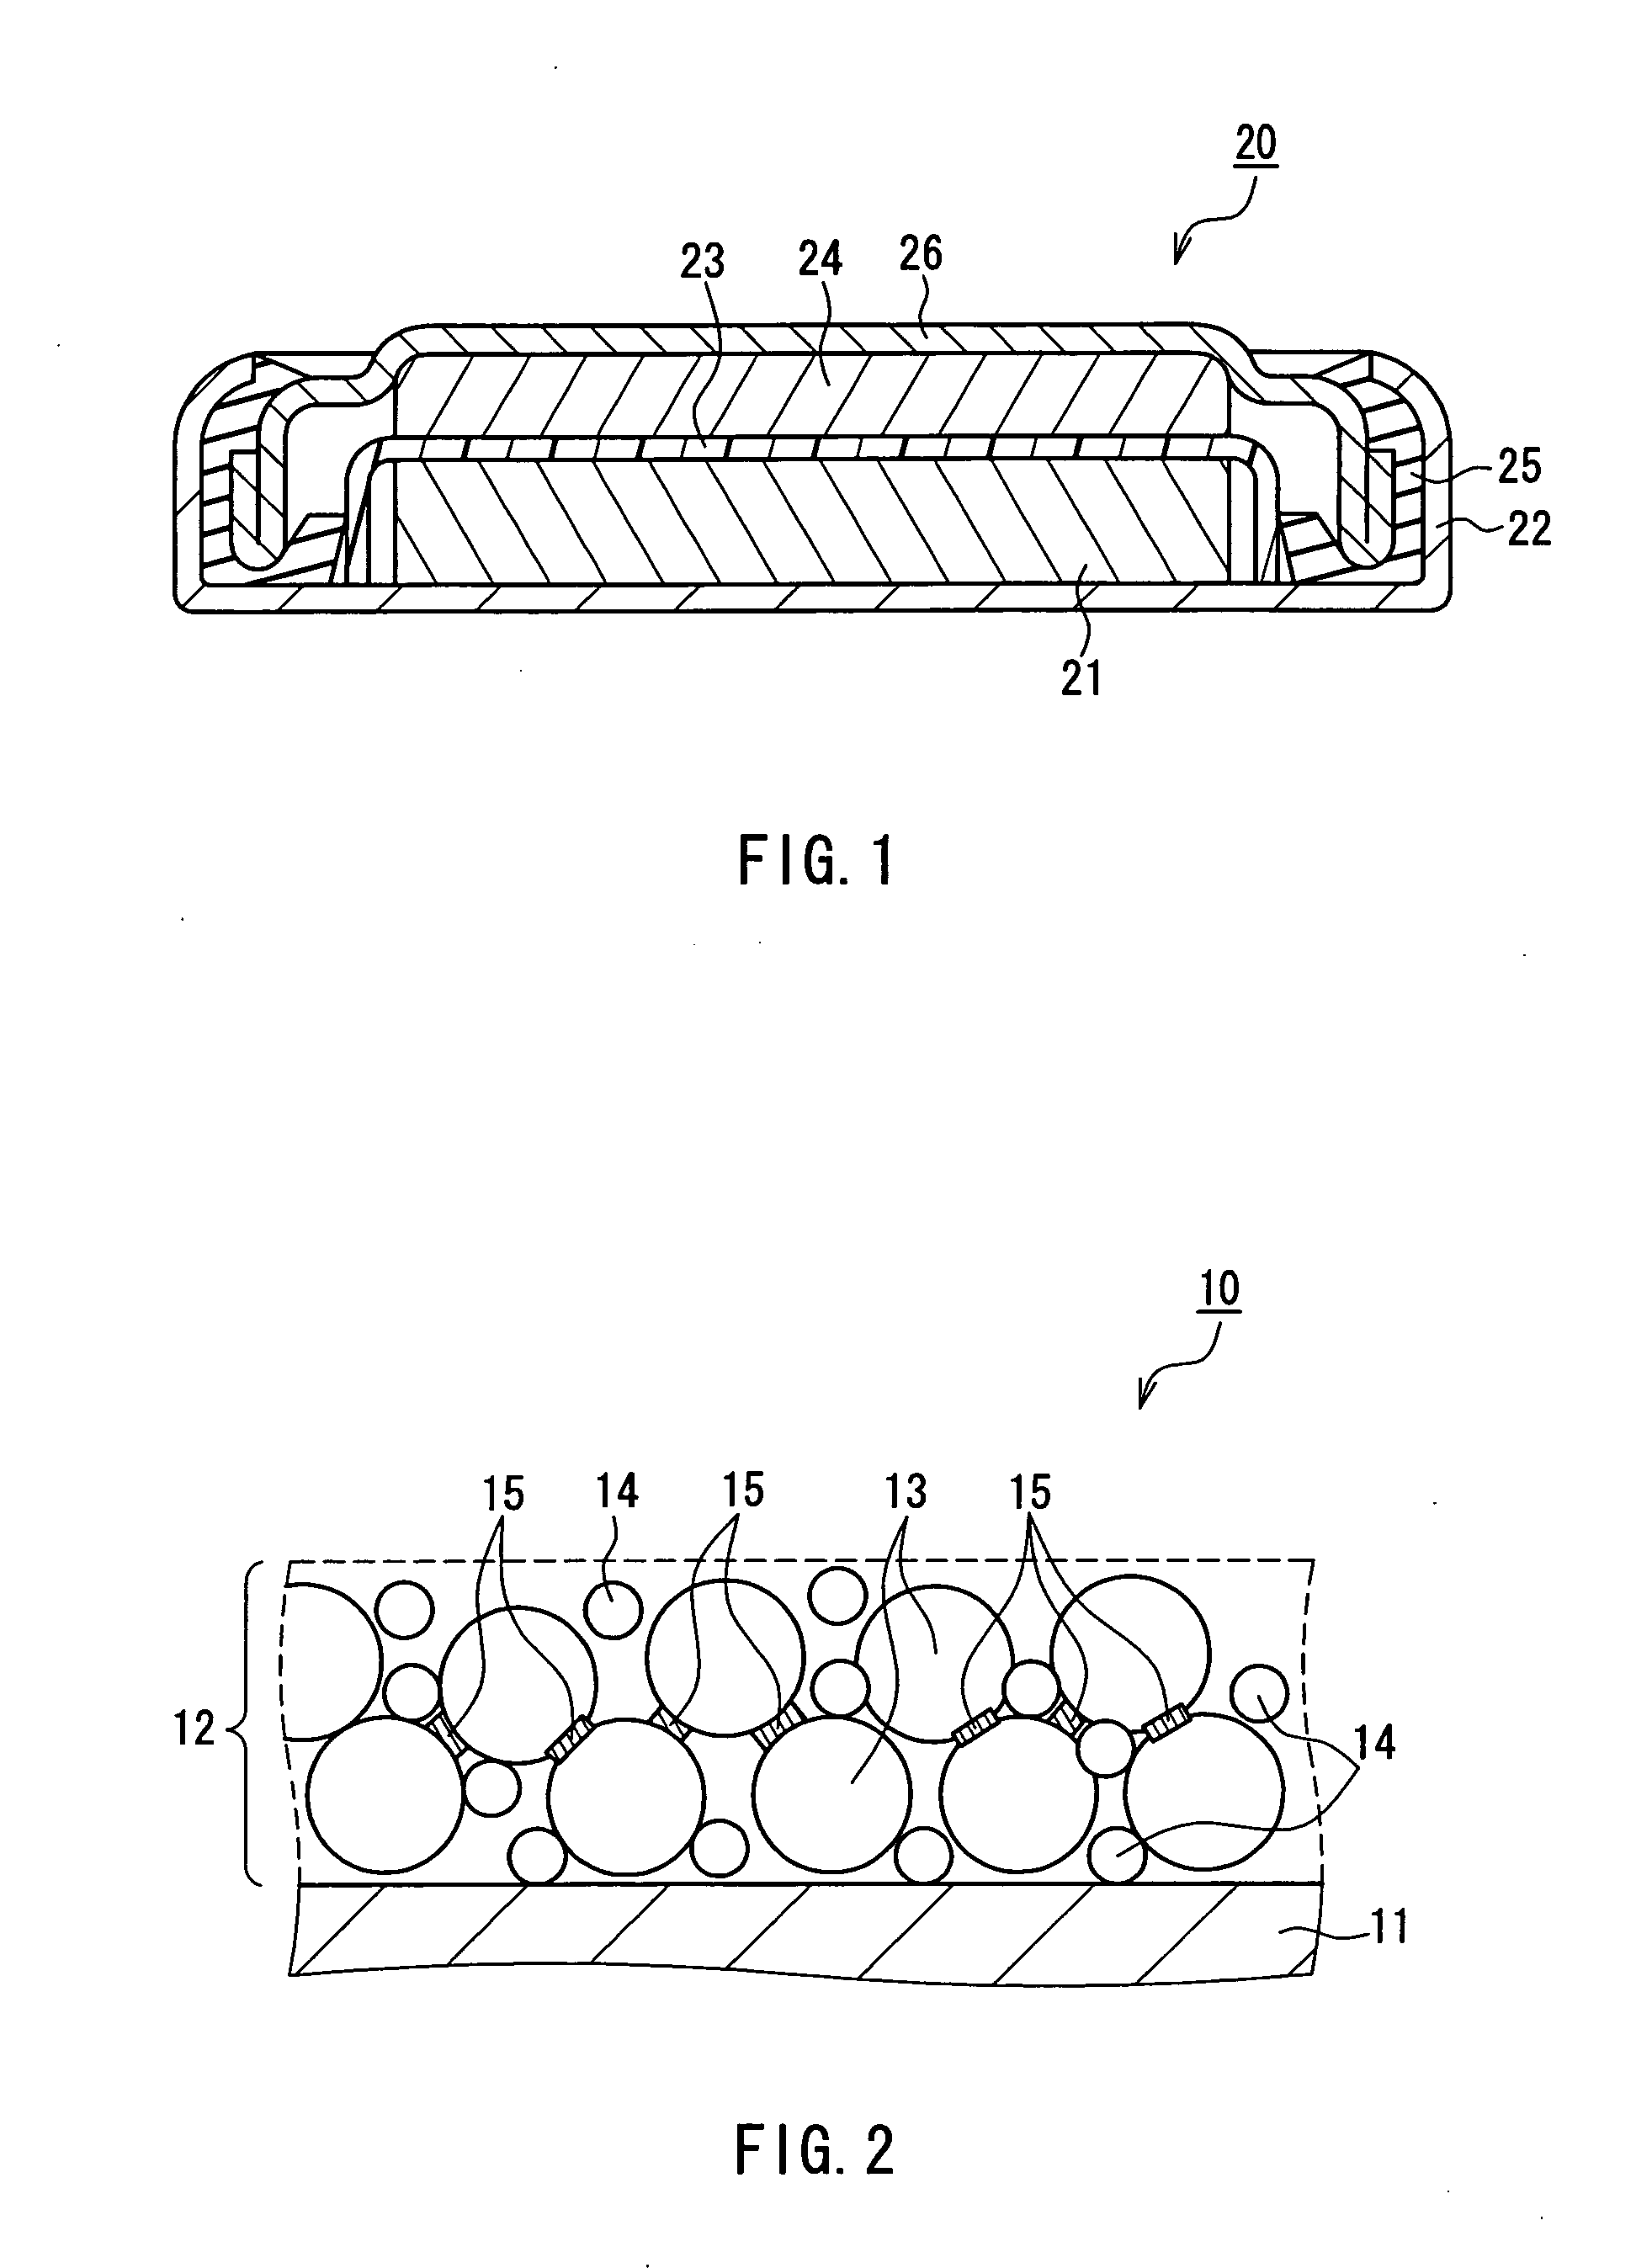 Nonaqueous electrolyte secondary battery and method for producing same